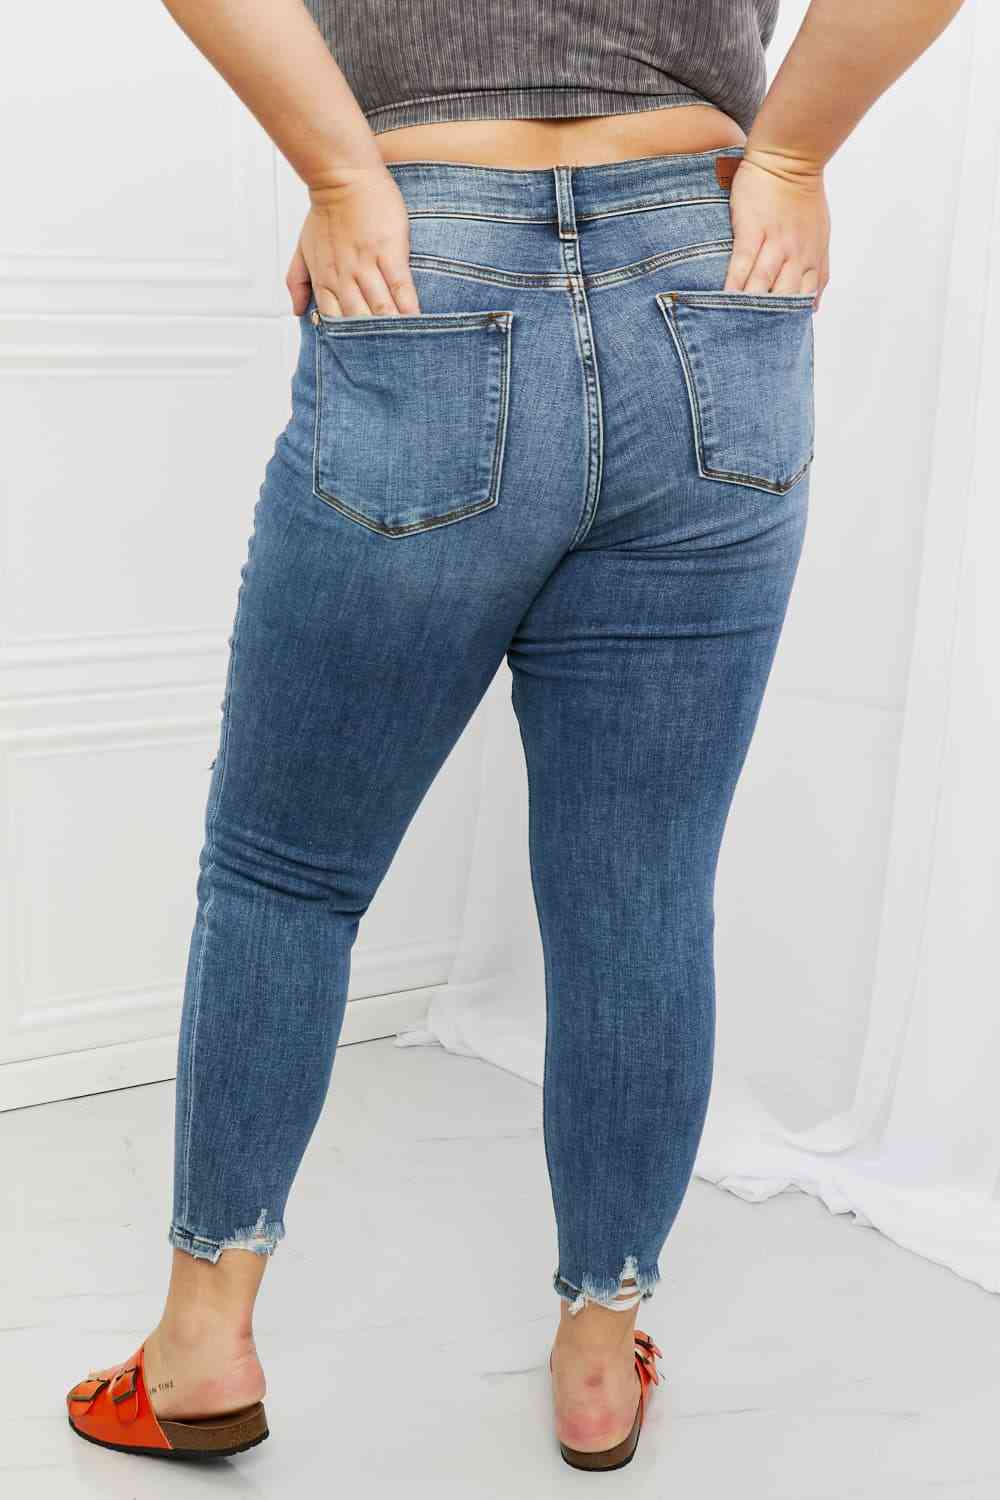 Judy Blue Dahlia Full Size Distressed Patch Jeans  Krazy Heart Designs Boutique   